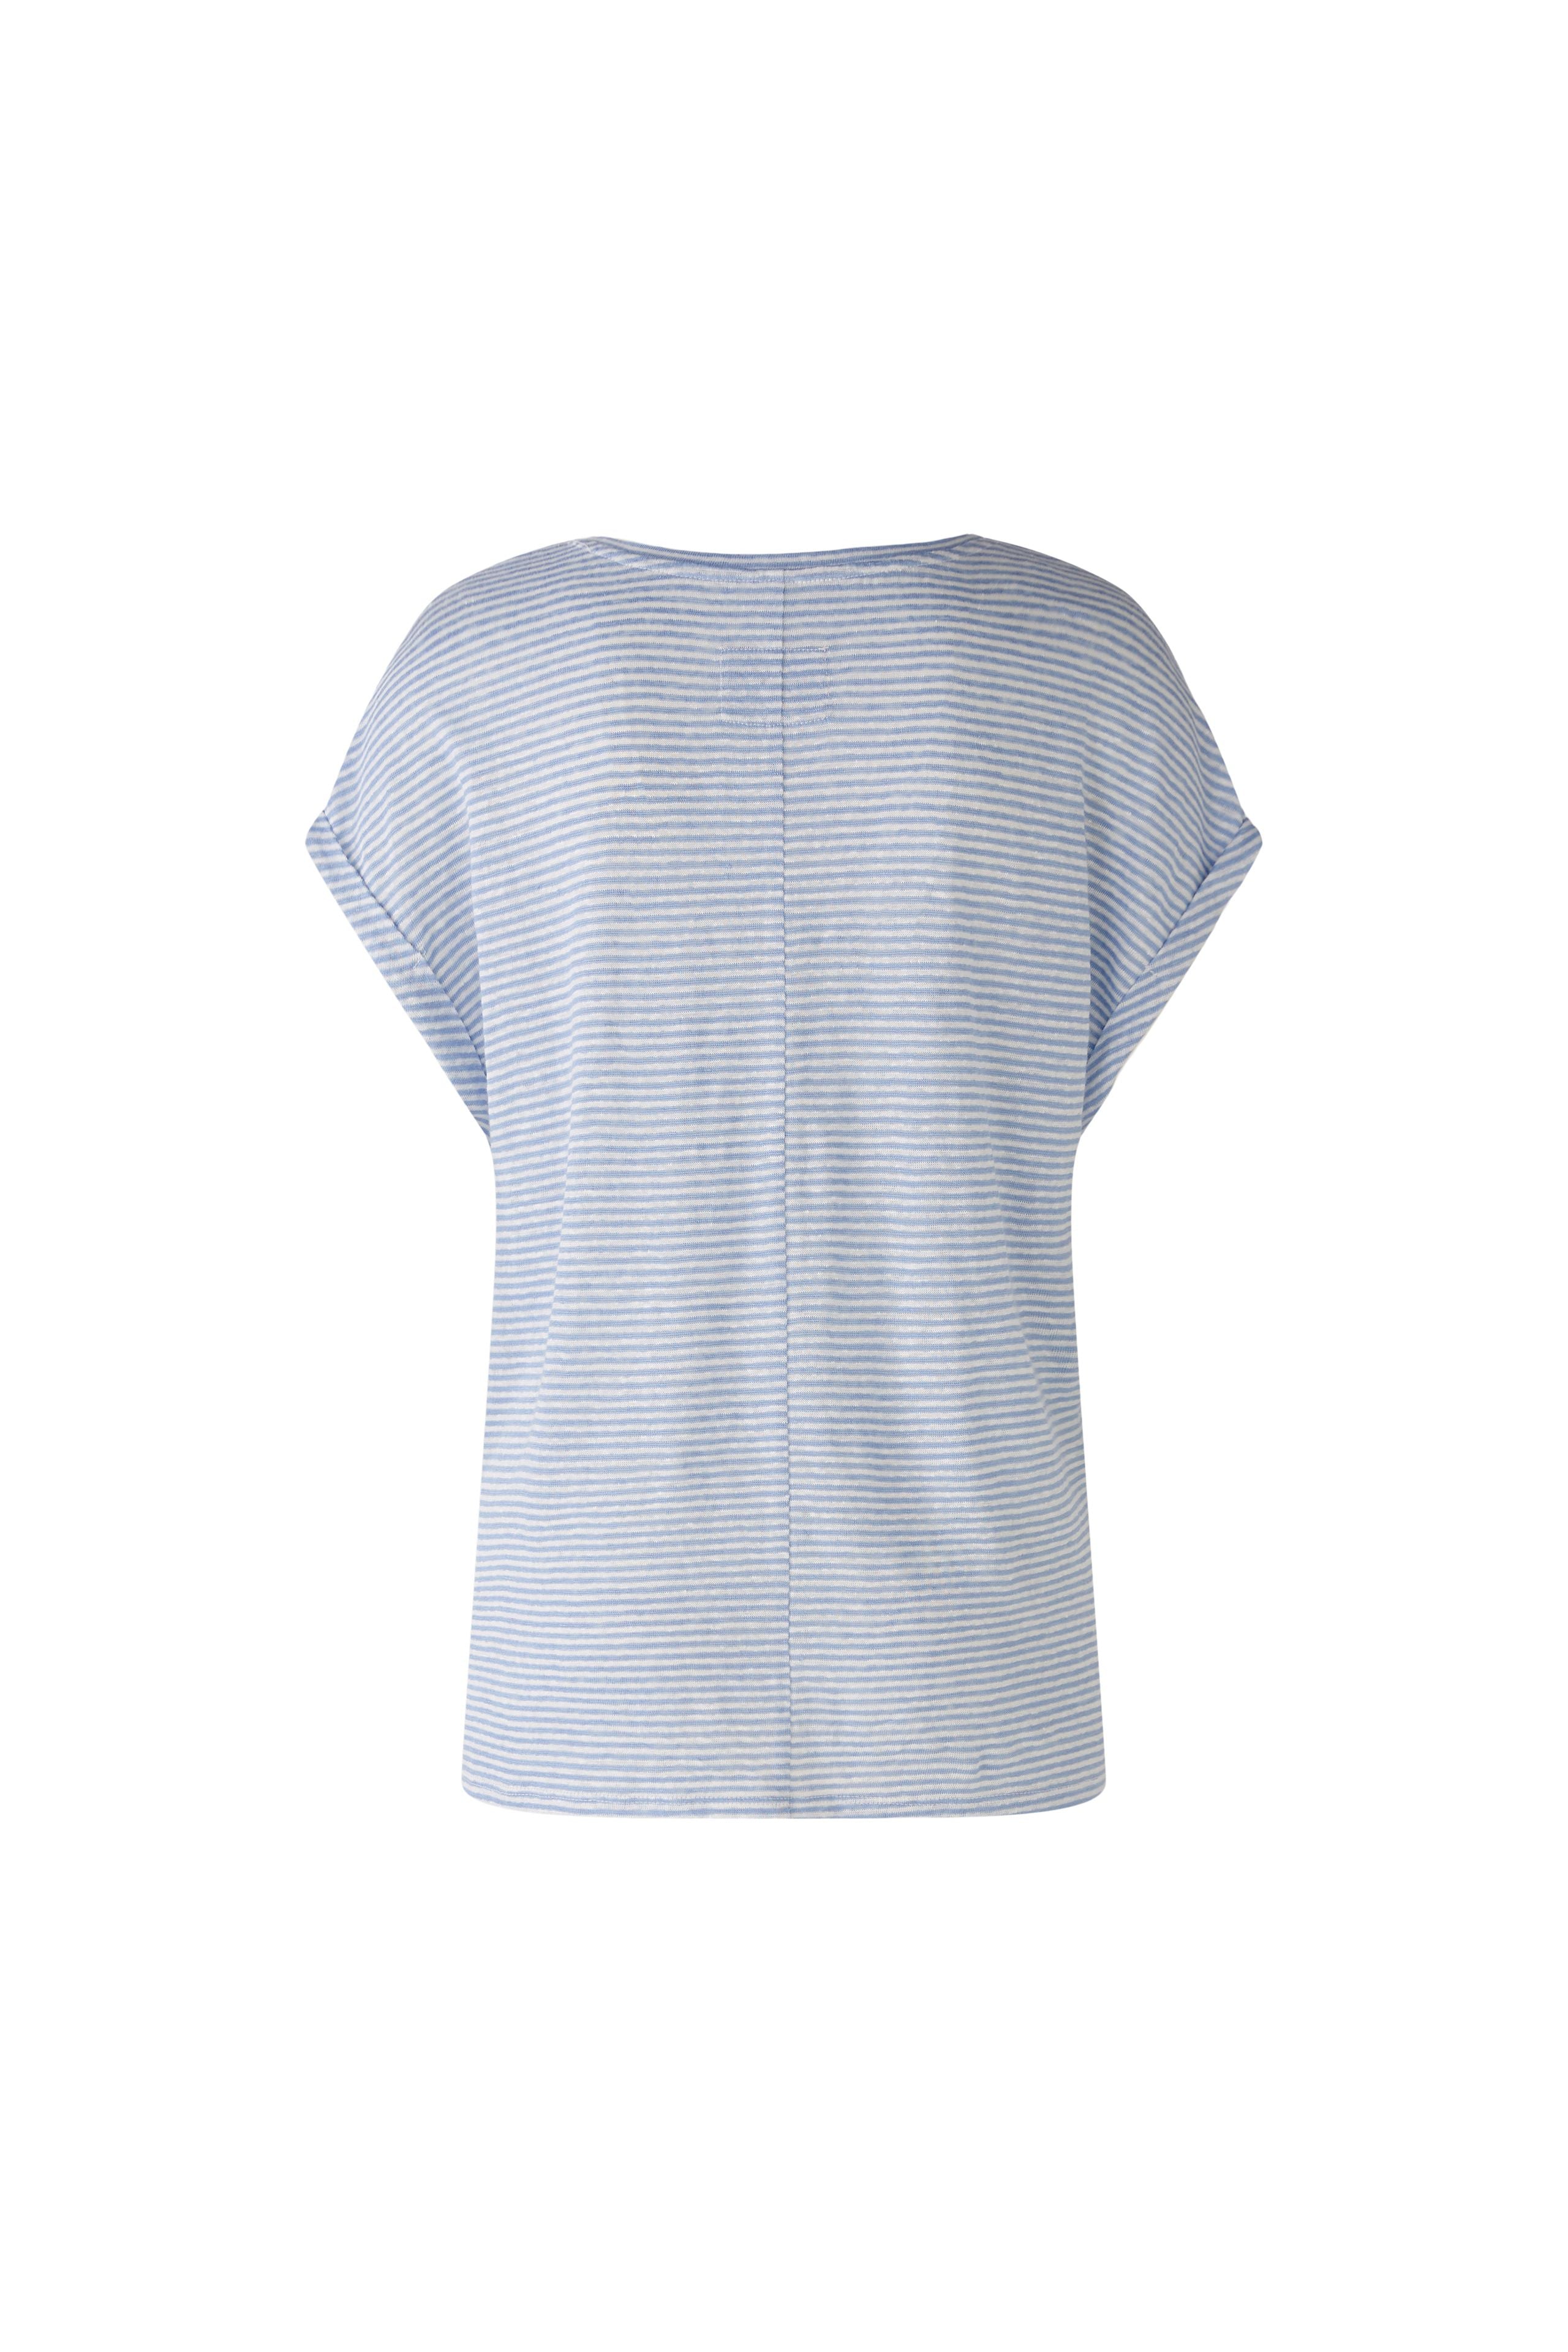 Casual Cut T-Shirt in Off White/Blue